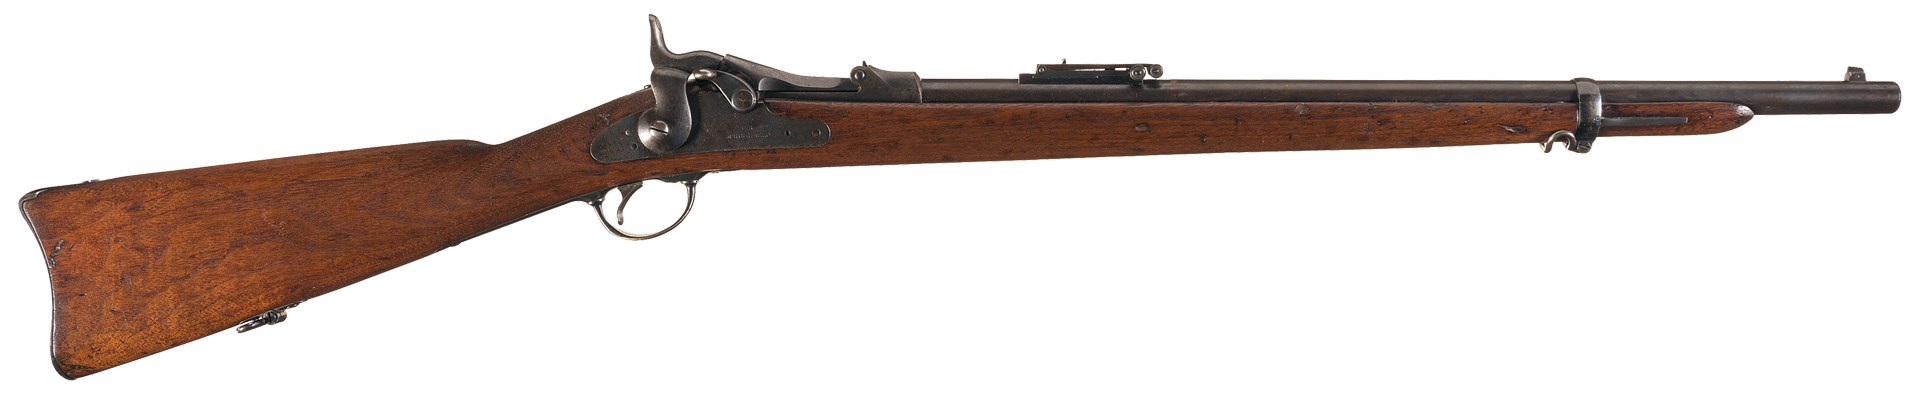 Model 1886 Trapdoor experimental full-stock carbine Author’s collection